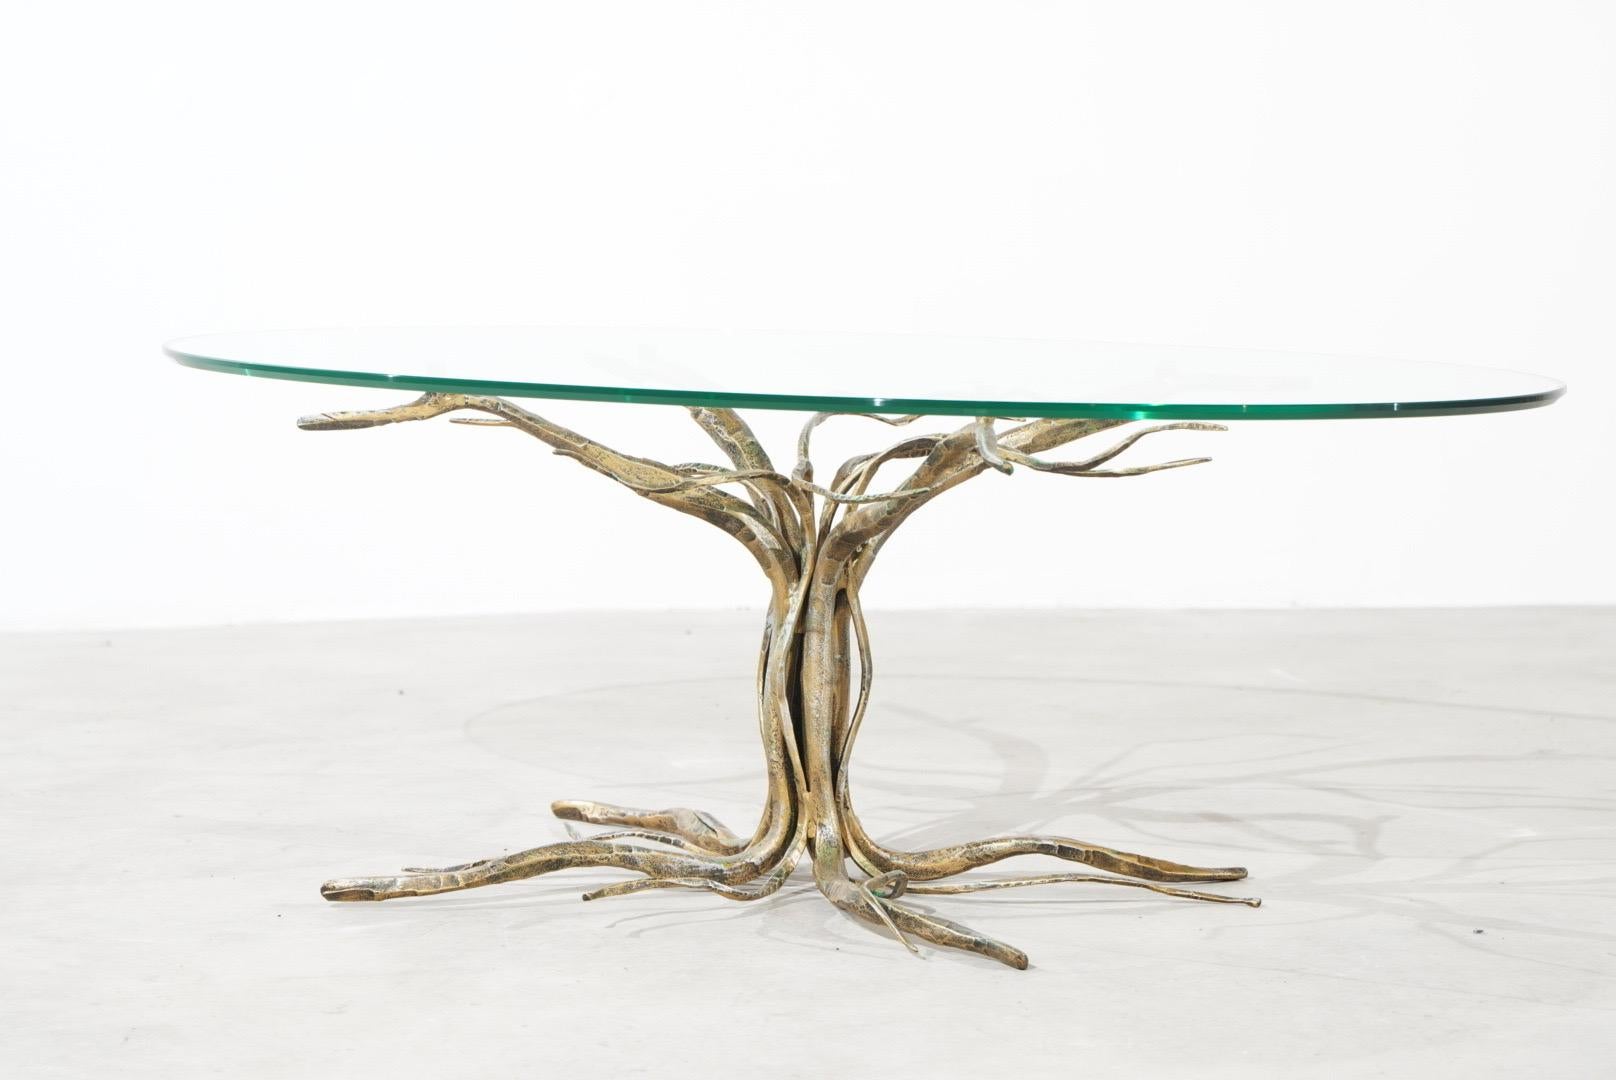 Gorgeous coffee table handcrafted by Italian Artist and Sculptor Salvino Marsura, who passed away in May 2020.
The coffee table shows an amazing tree in heavy gilt wrought iron.
On top is the original crystal glass top with cut edge.
The table is